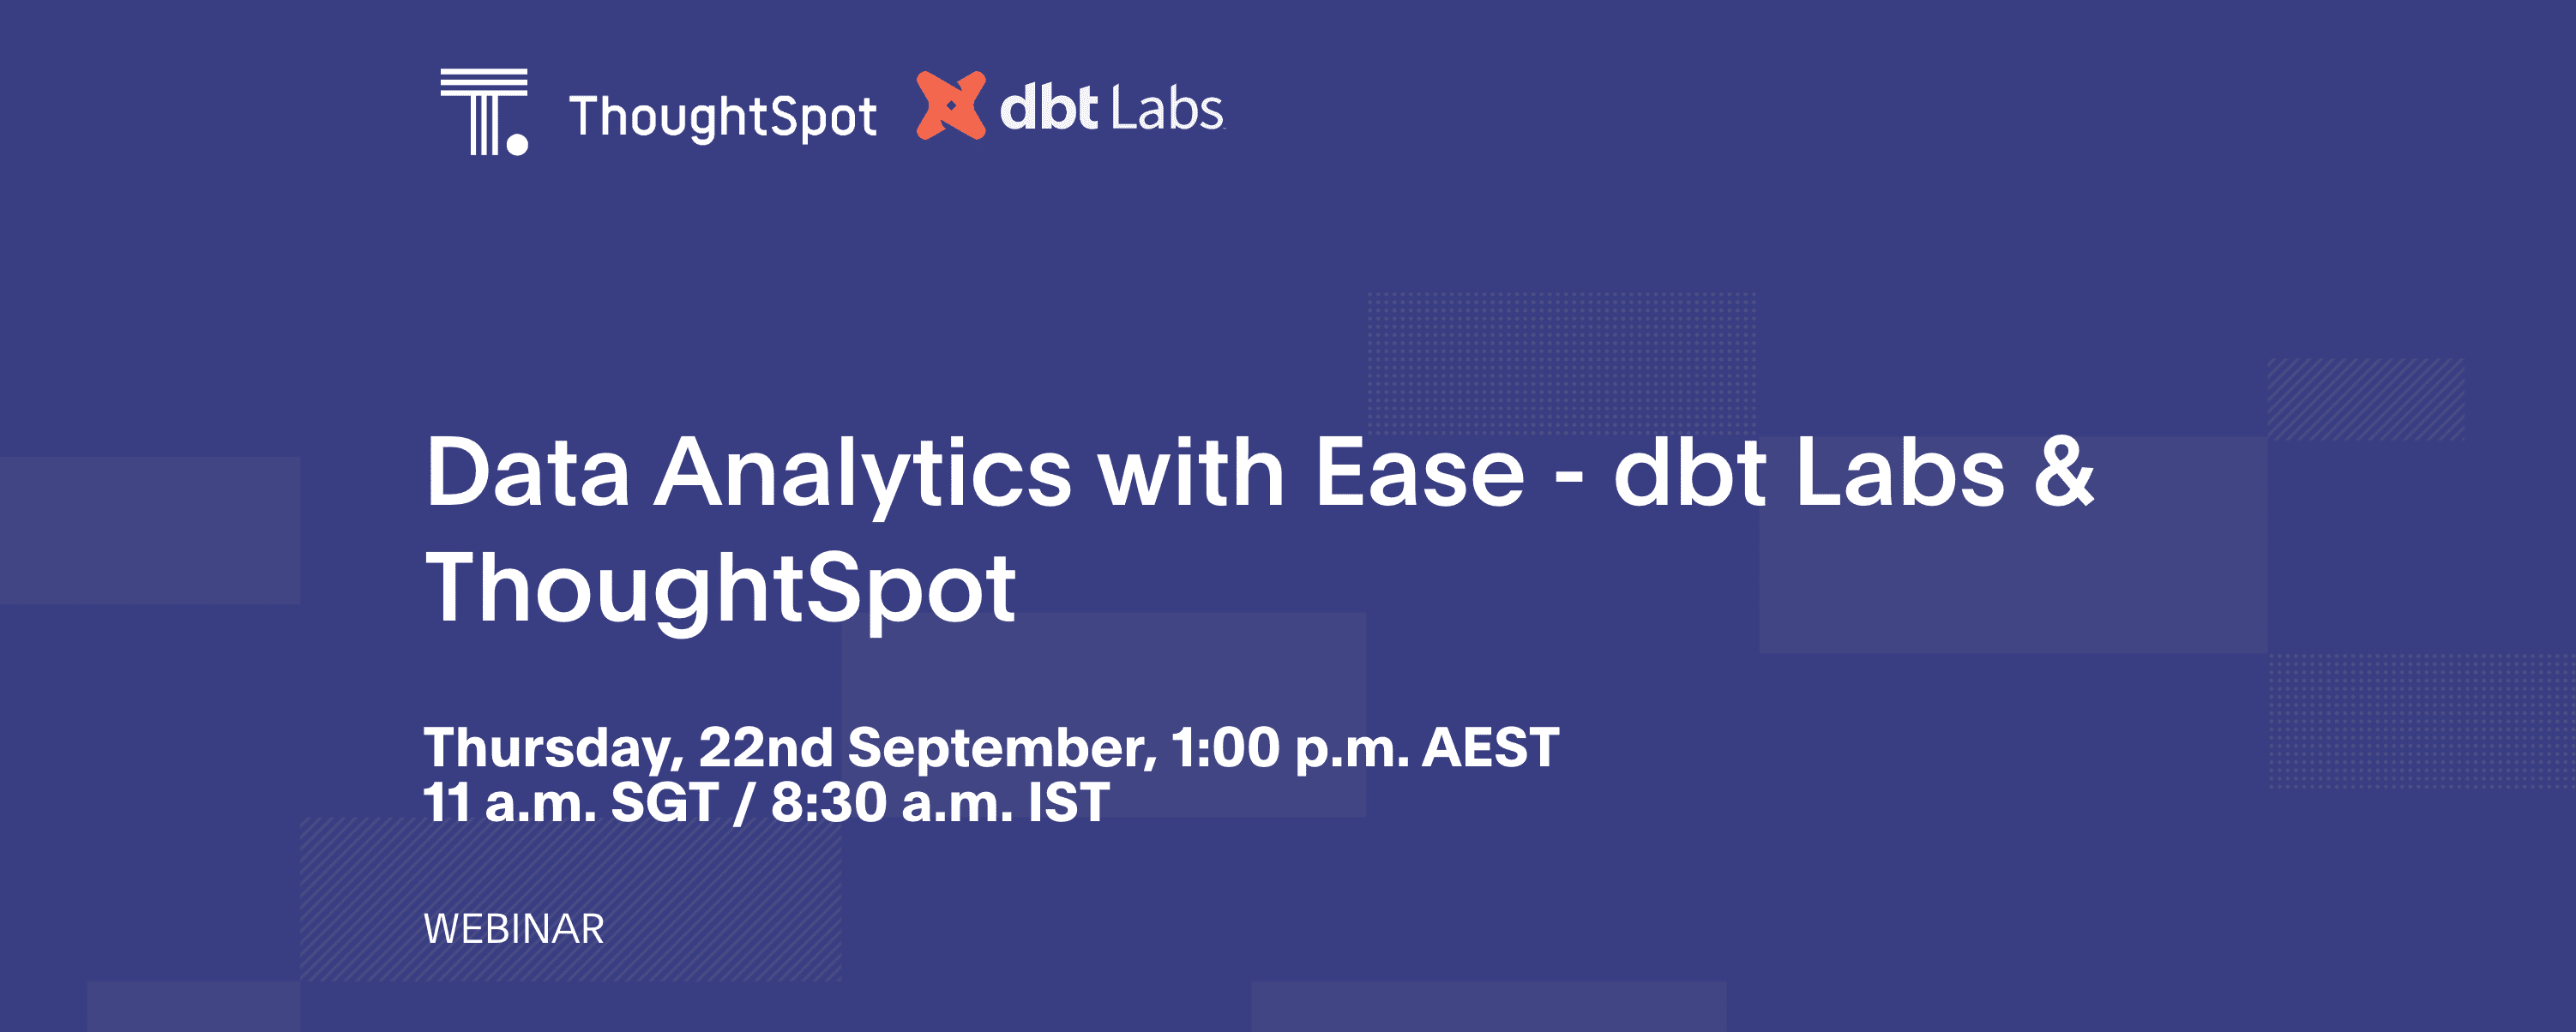 Data Analytics with Ease - dbt Labs & ThoughtSpot